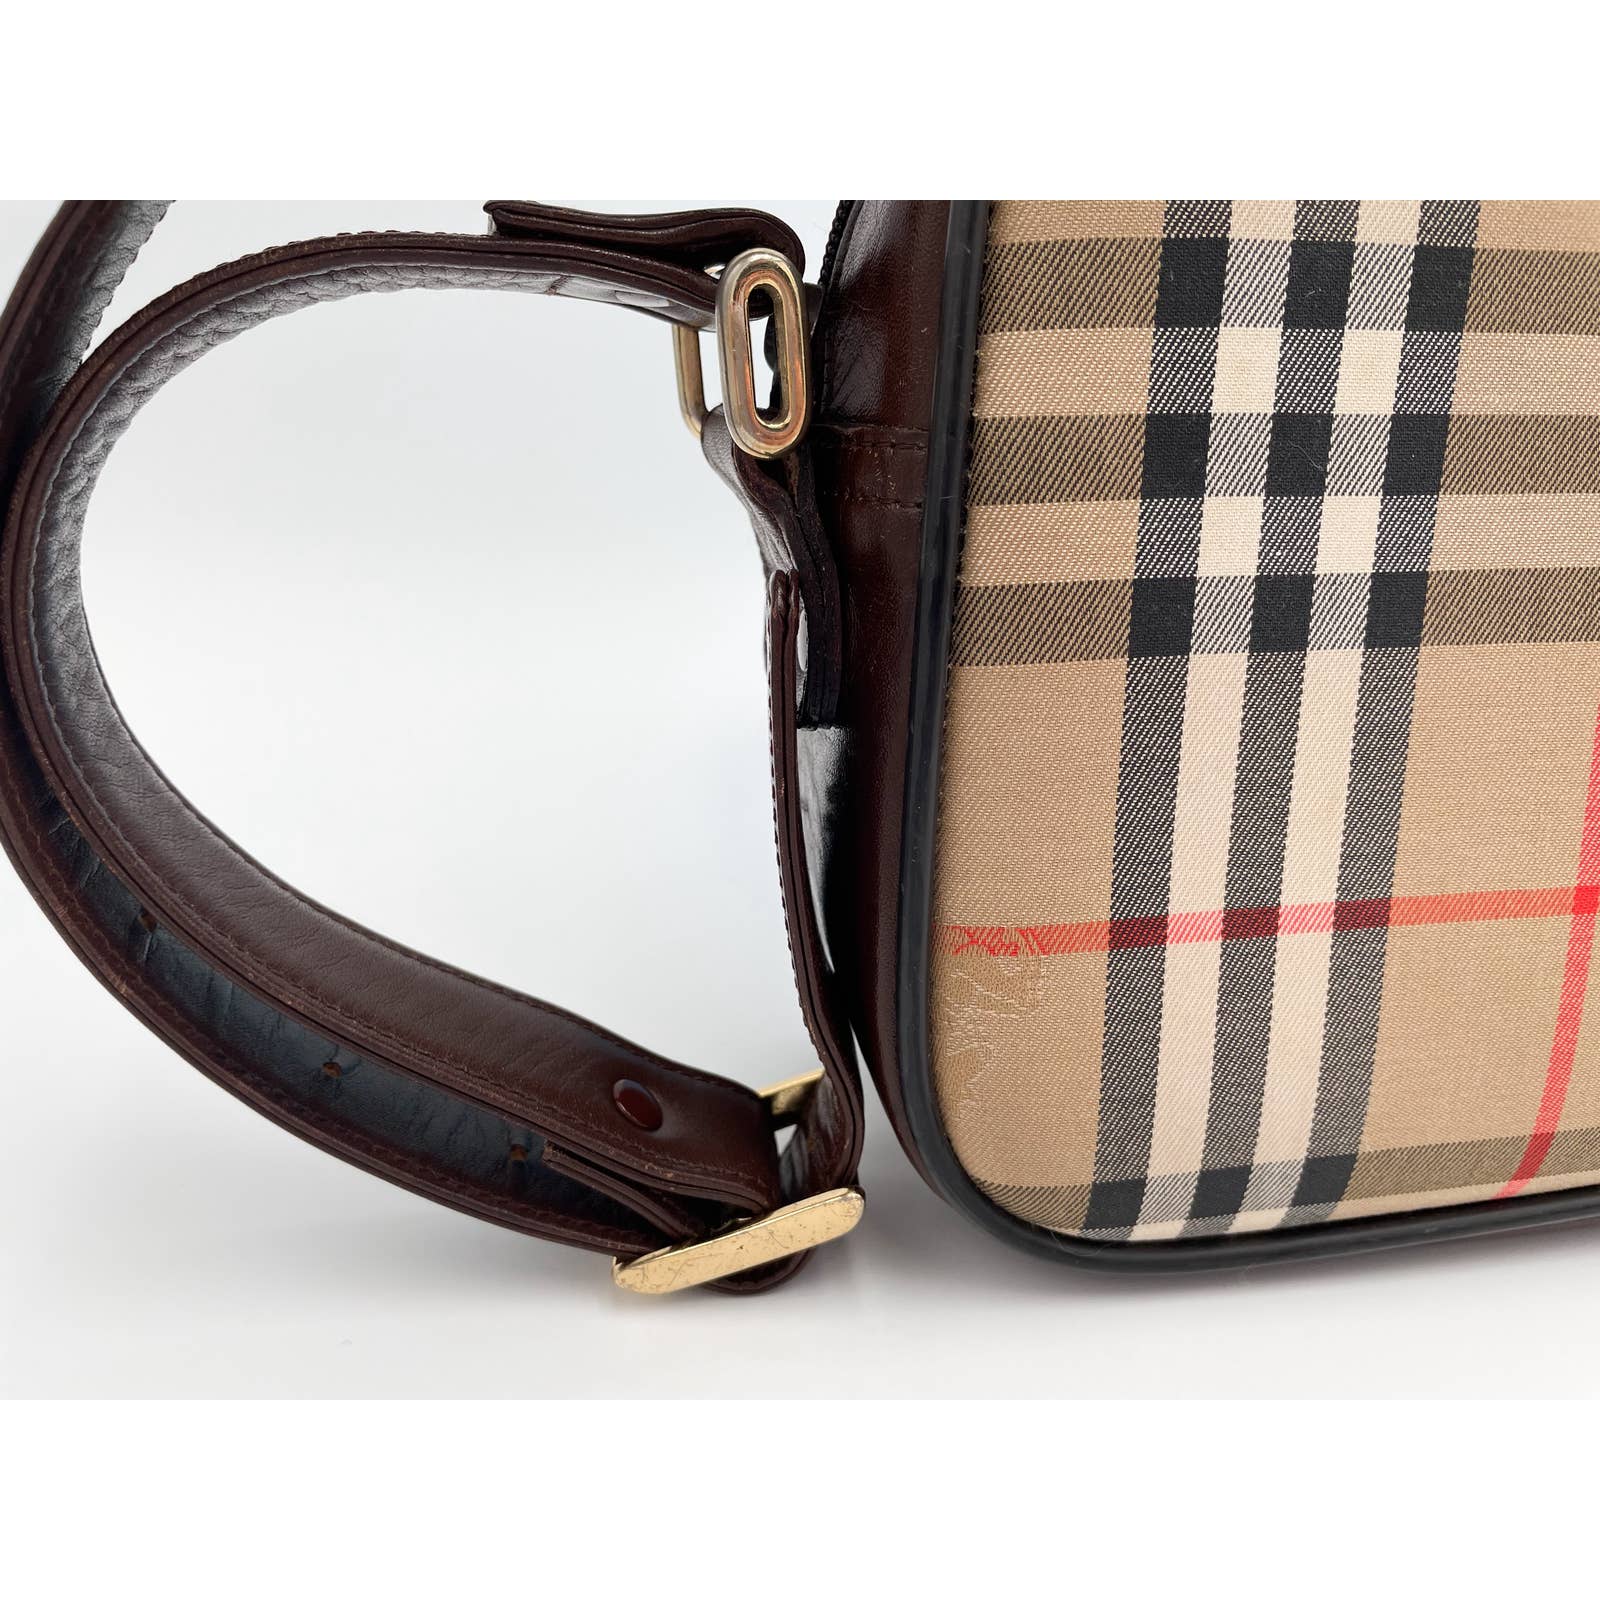 A close-up of a Burberry Crossbody Bag with a checkered pattern featuring brown, black, white, and red stripes. The bag has a brown leather strap with a gold buckle and an adjustable strap. A small golden clasp adds a touch of elegance. The background is white.